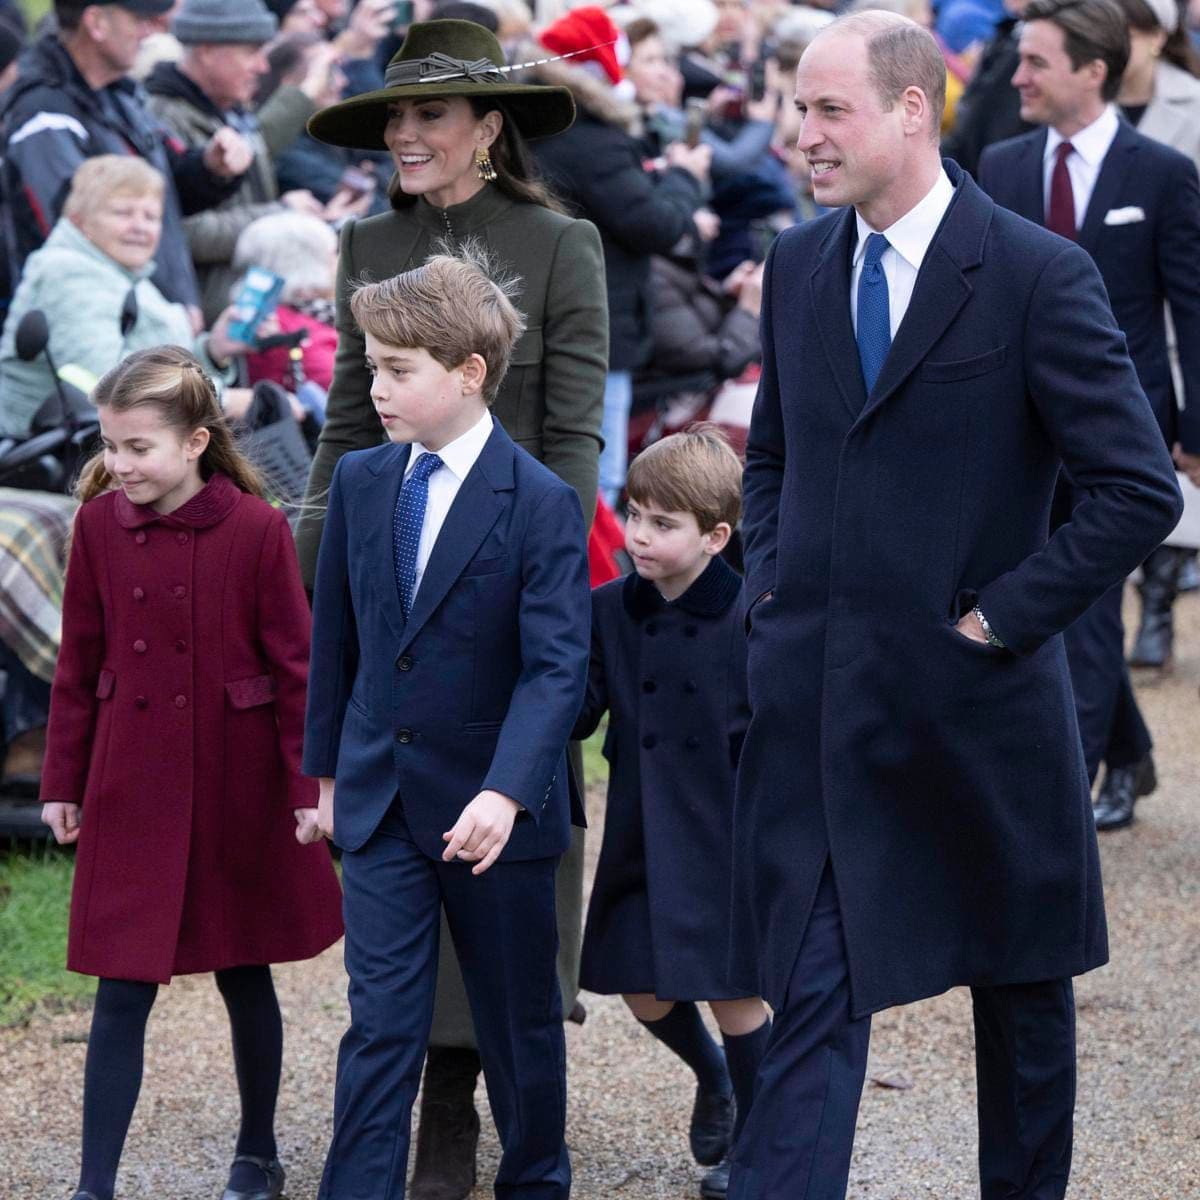 Princess Charlotte, Prince George and Prince Louis with their parents. This year is William and Catherine's first Christmas as the Prince and Princess of Wales